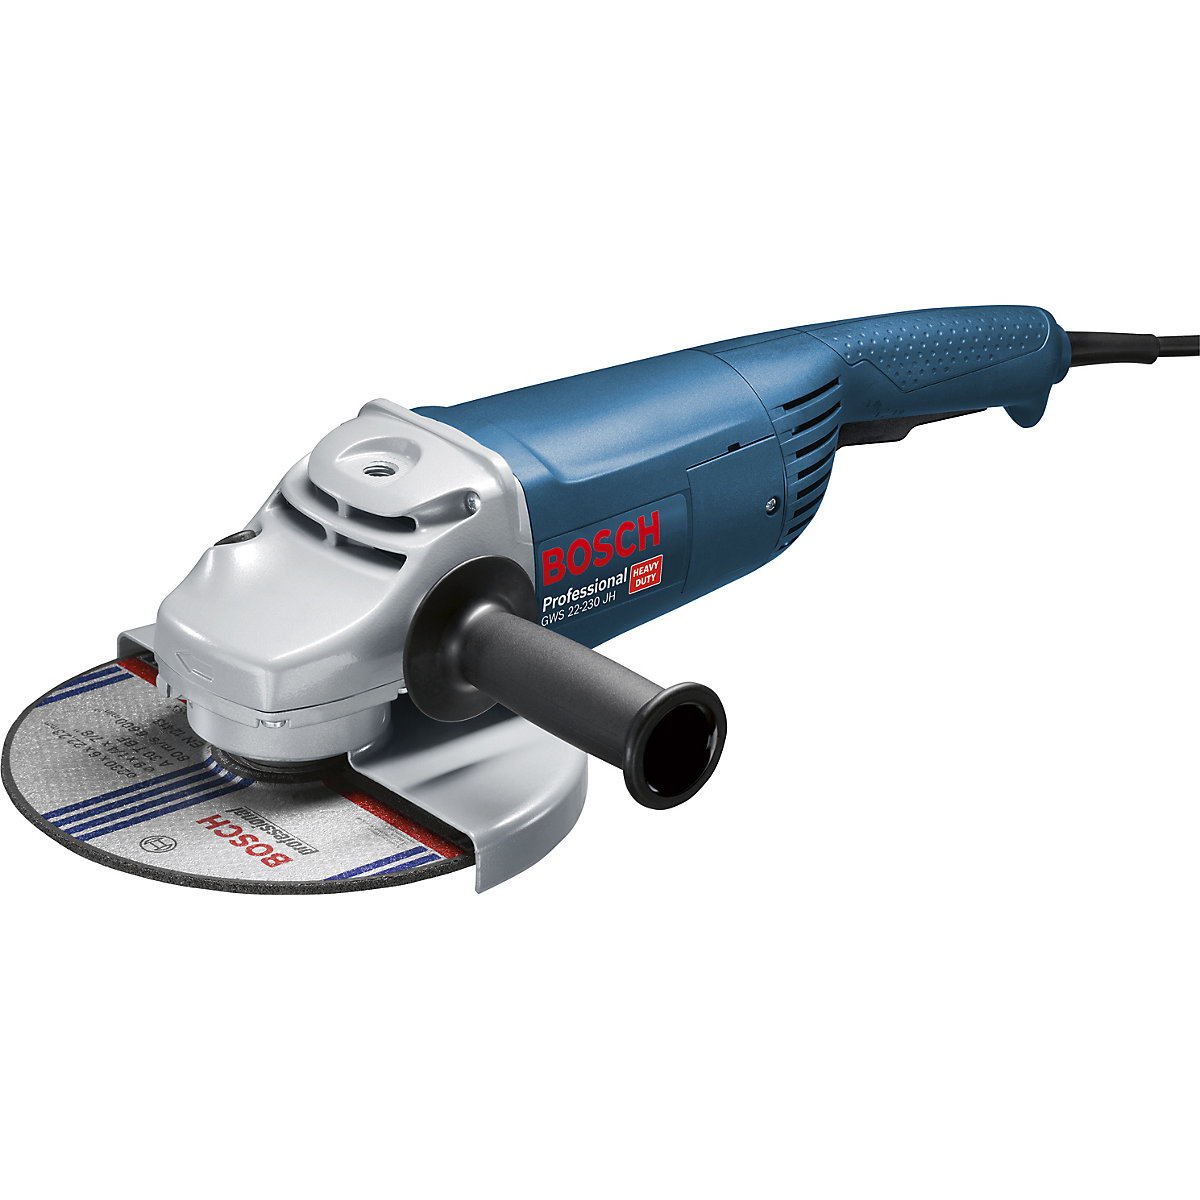 GWS 22-230 JH Professional angle grinder - Bosch